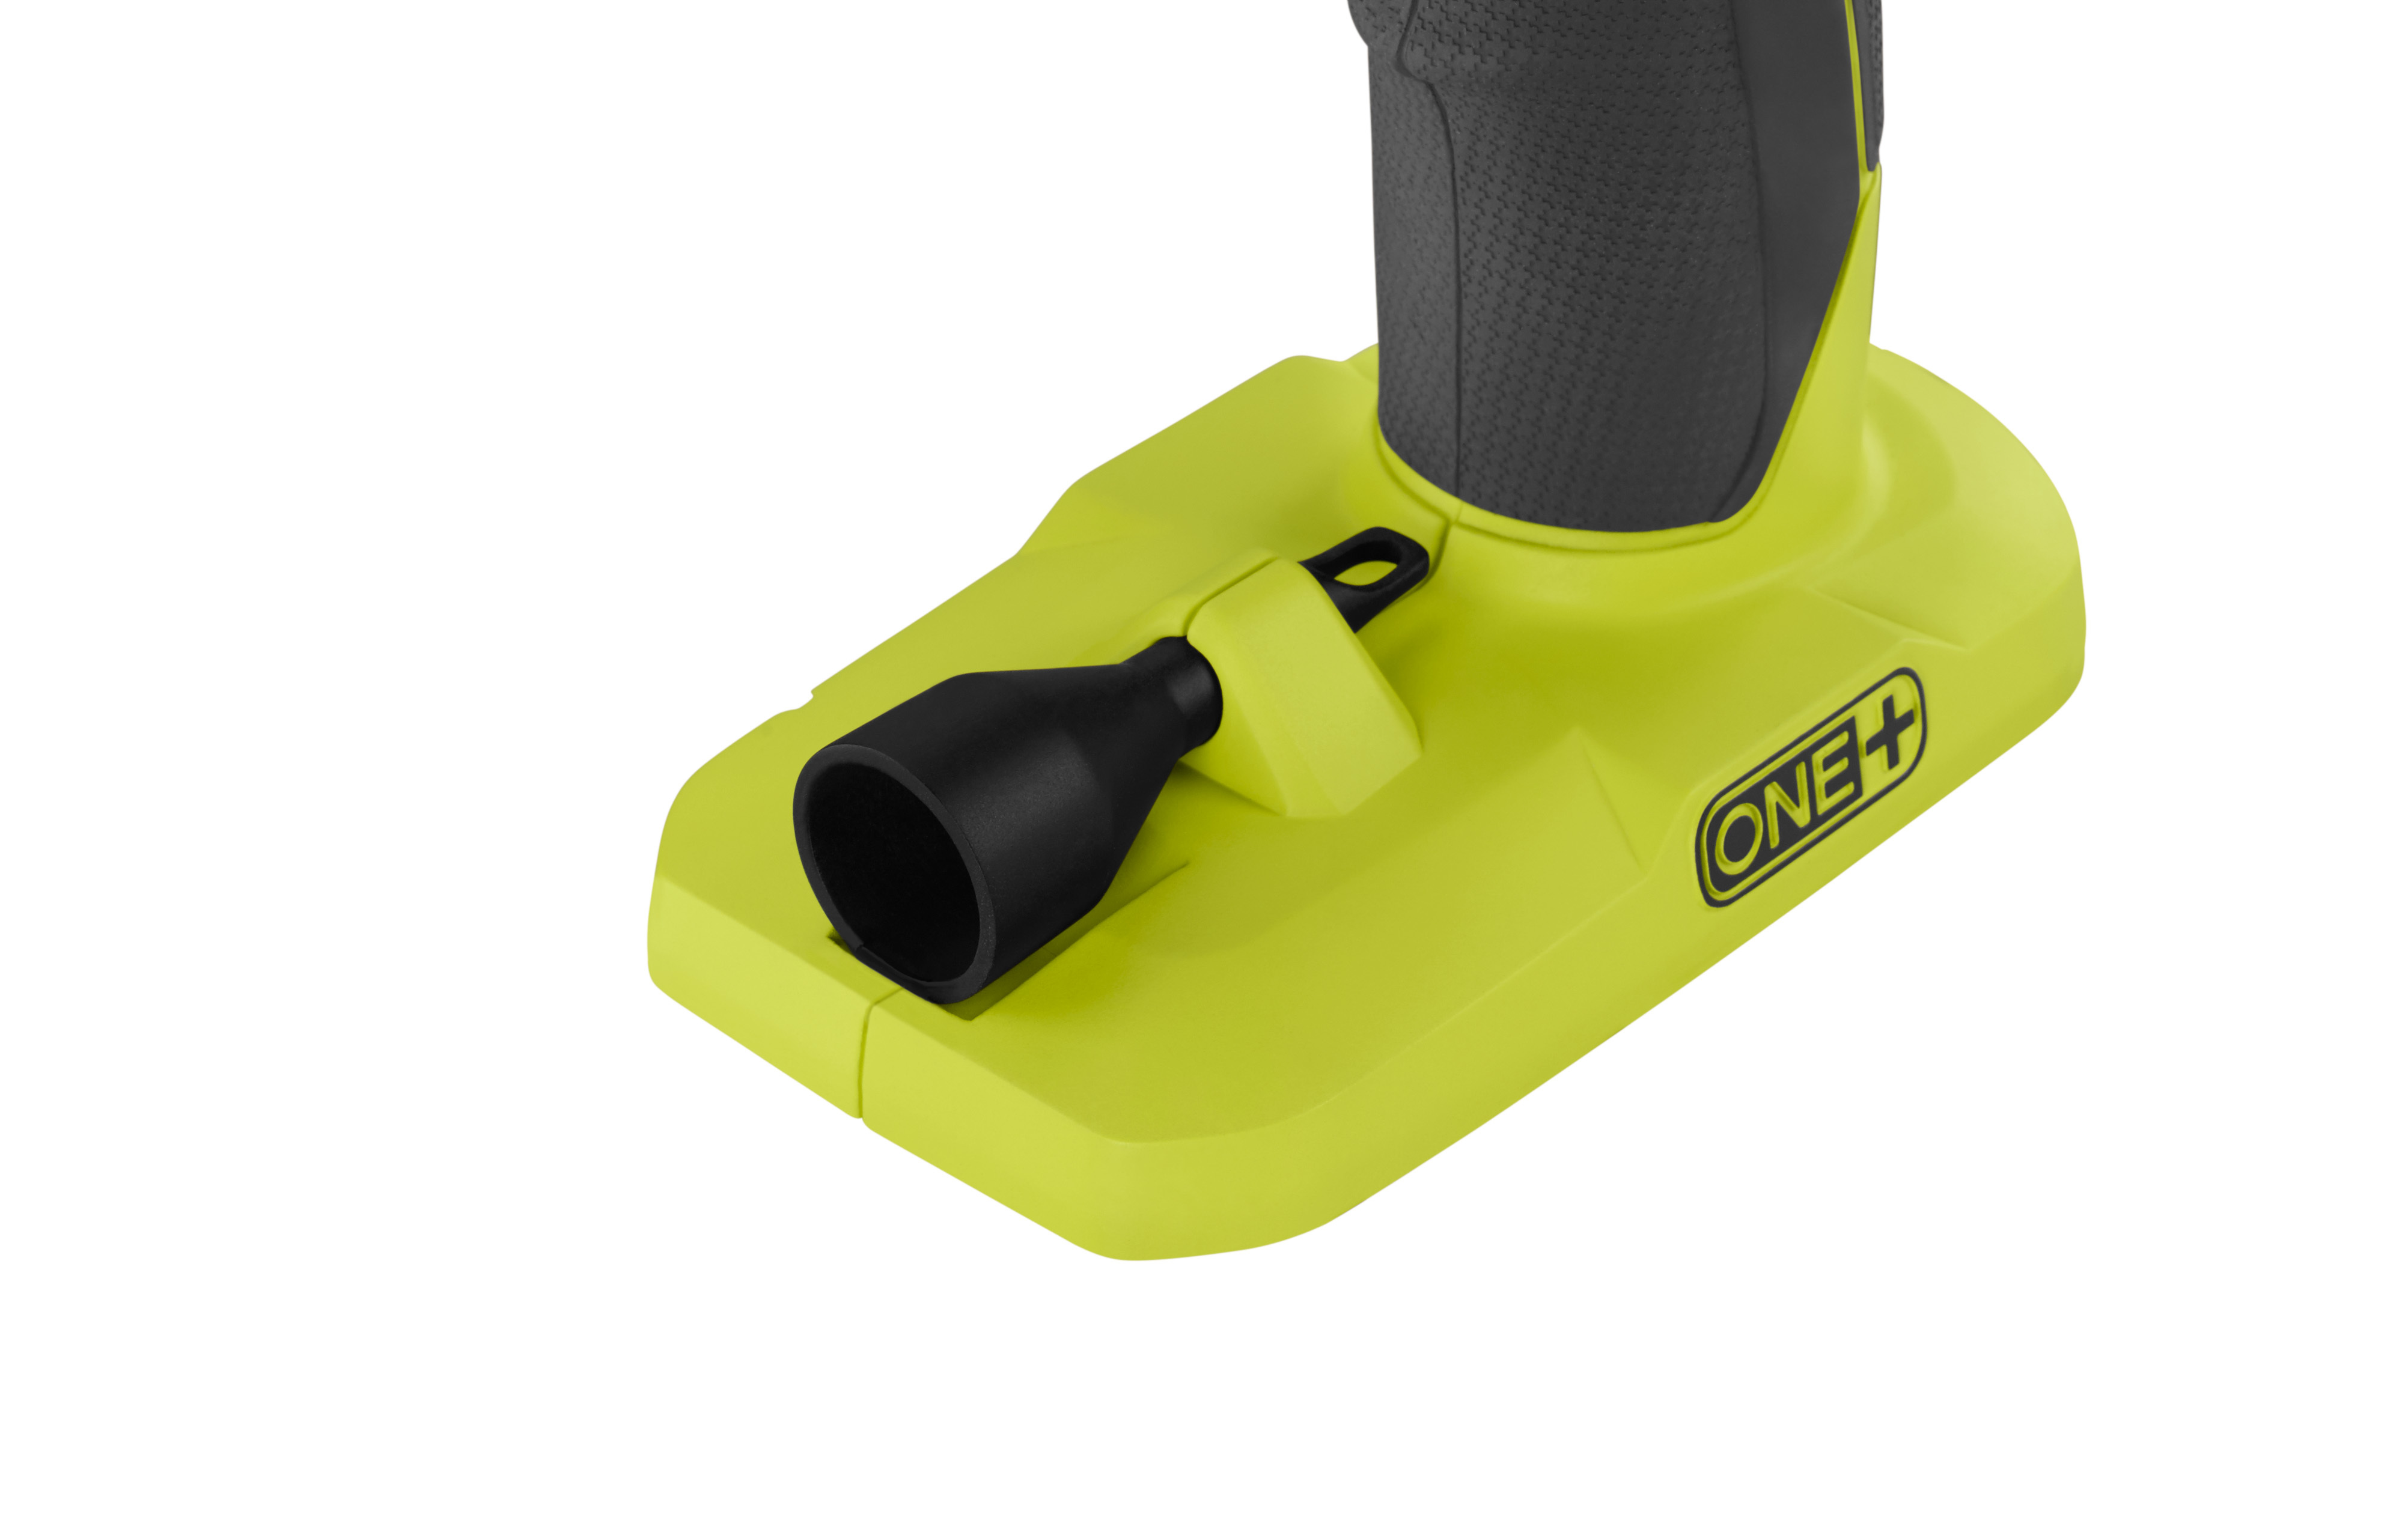 Ryobi 18-Volt ONE+ Cordless High Volume Power Inflator Blower 6.00 x 4.25 x  7.50 in (Tool-Only) 